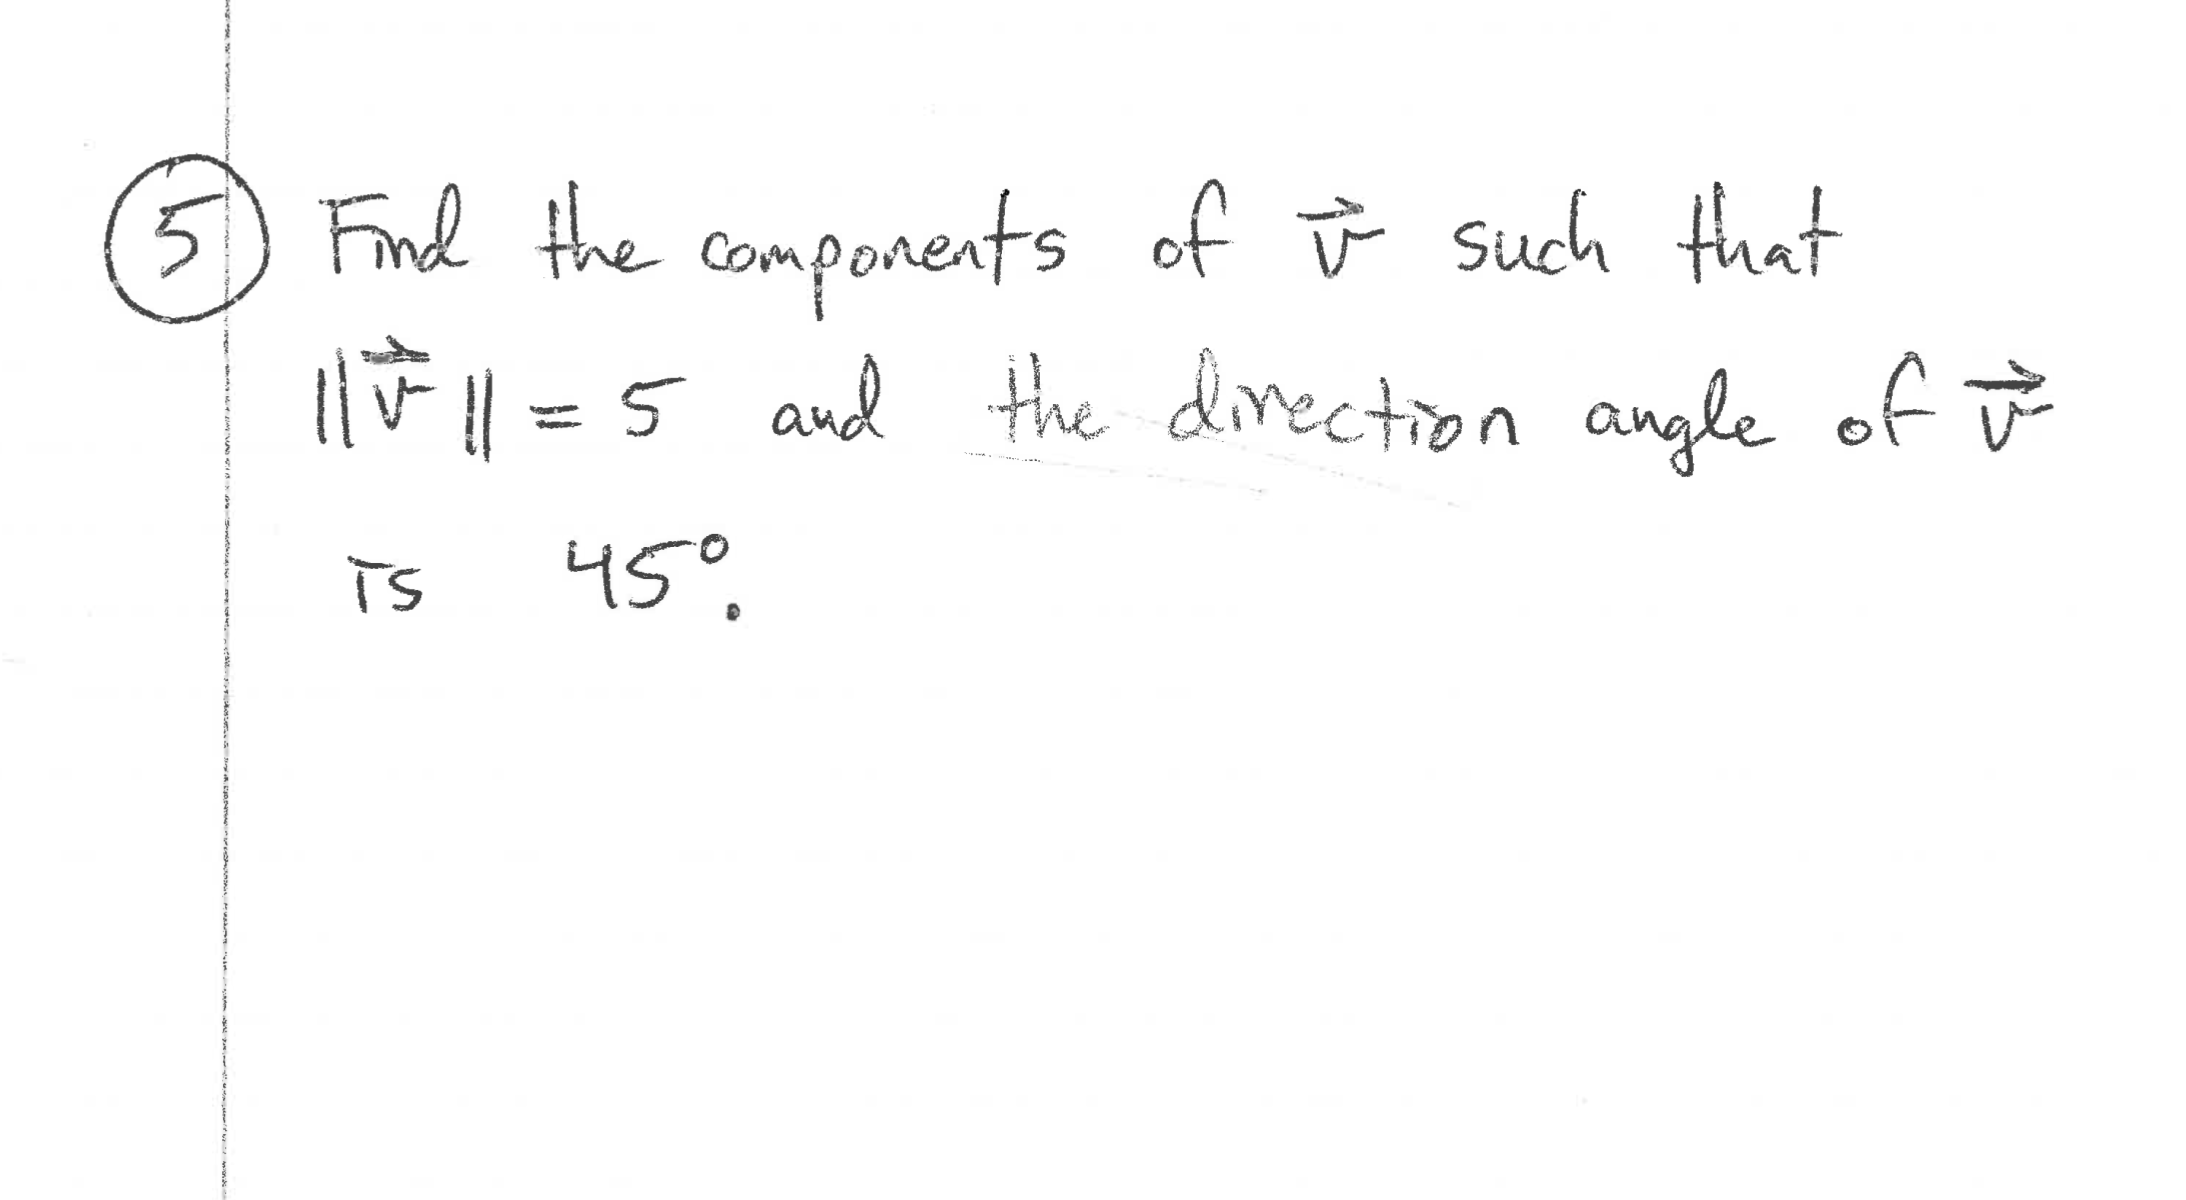 5) Find the components of ū such that
1F || =5 and the dinection angle of ù
45°.
Ts
